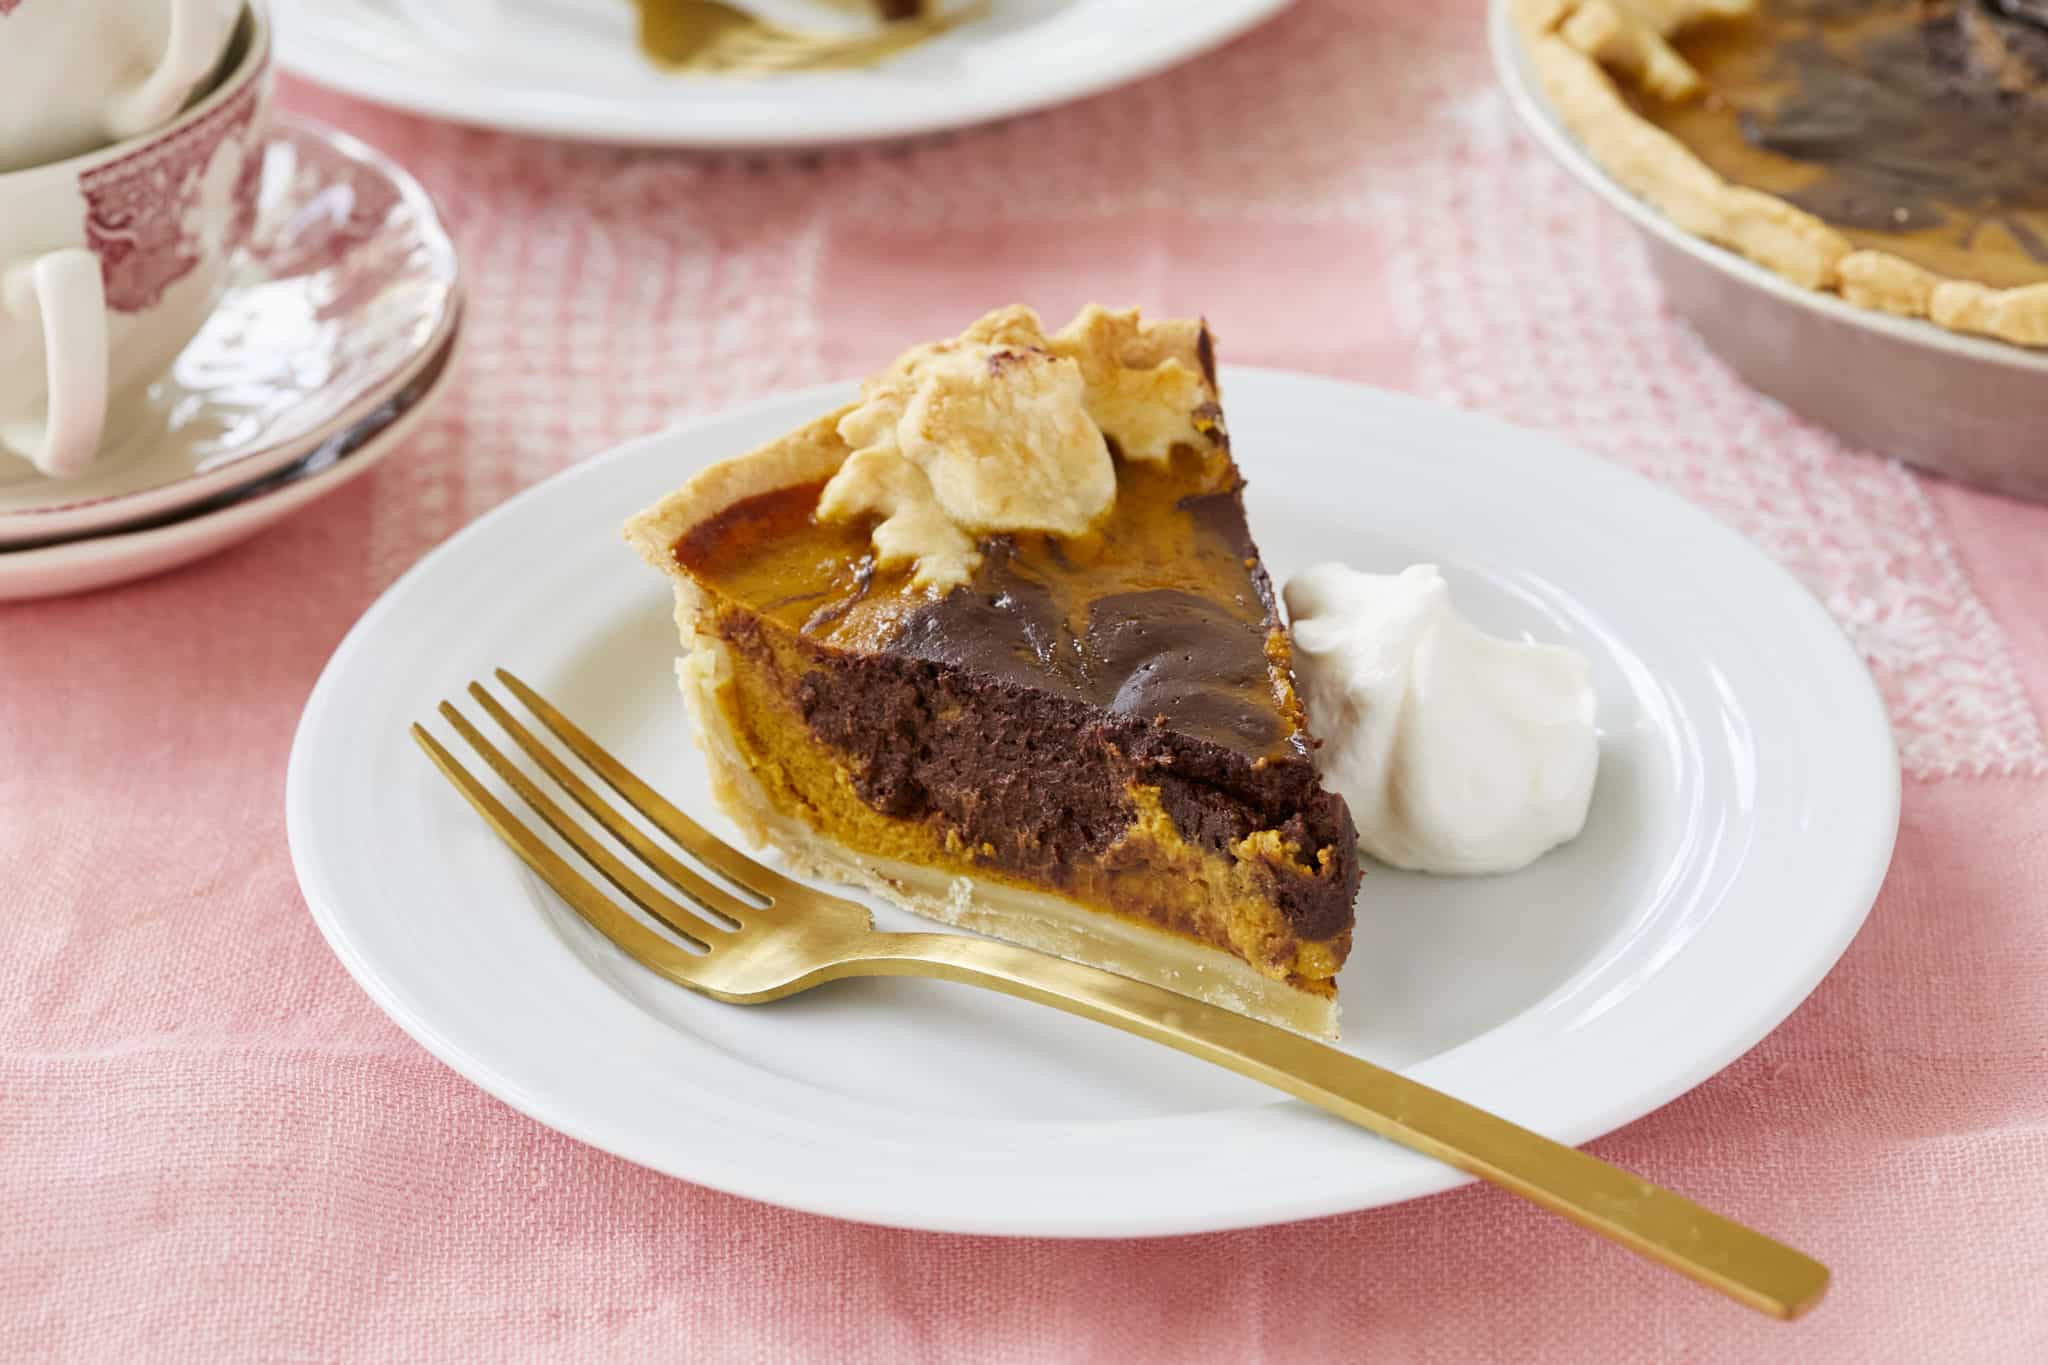 A slice of Chocolate Swirl Pumpkin Pie is served on a white dish with a dollop of homemade whipped cream on the side. Semisweet chocolate is swirled throughout the pumpkin filling.